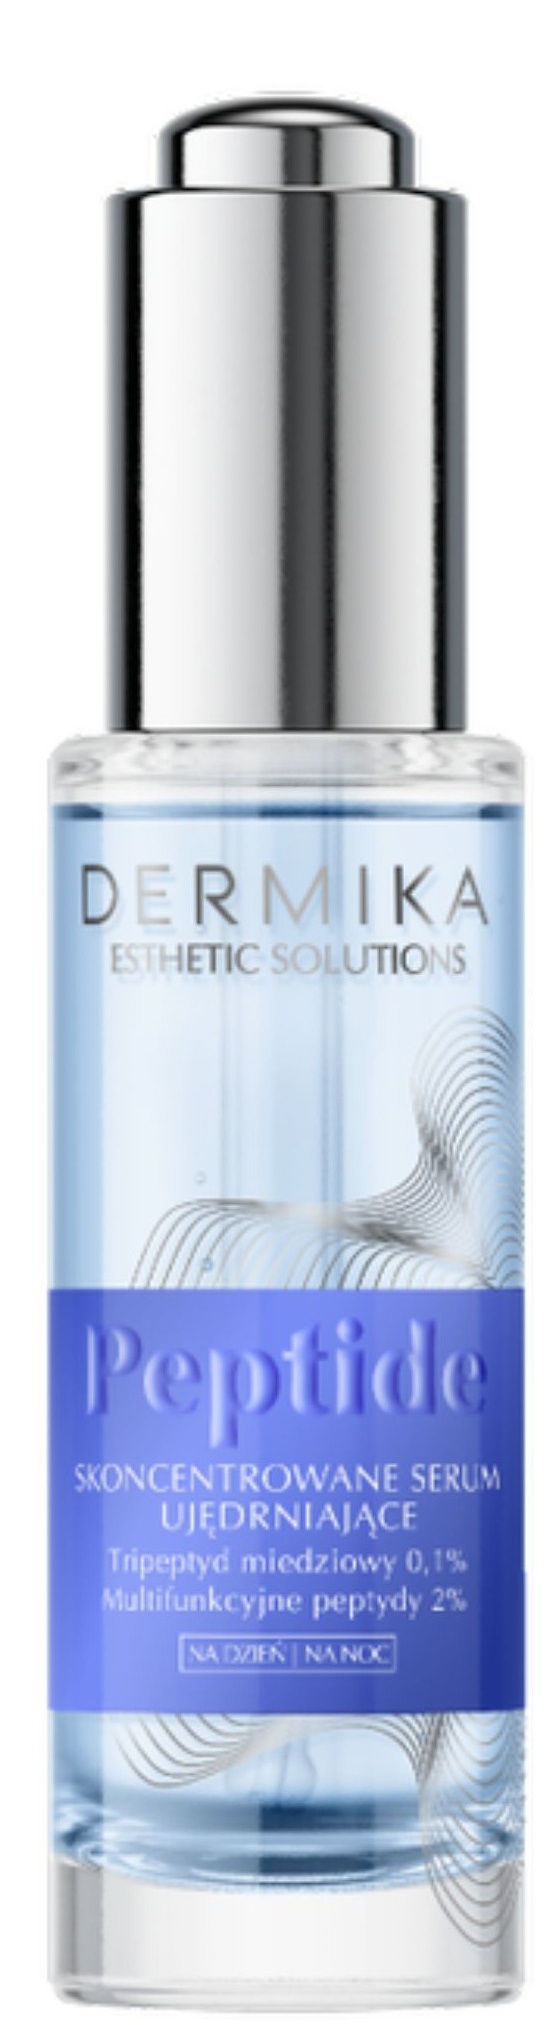 Dermika Esthetic Solutions Peptide Concentrated Firming Serum